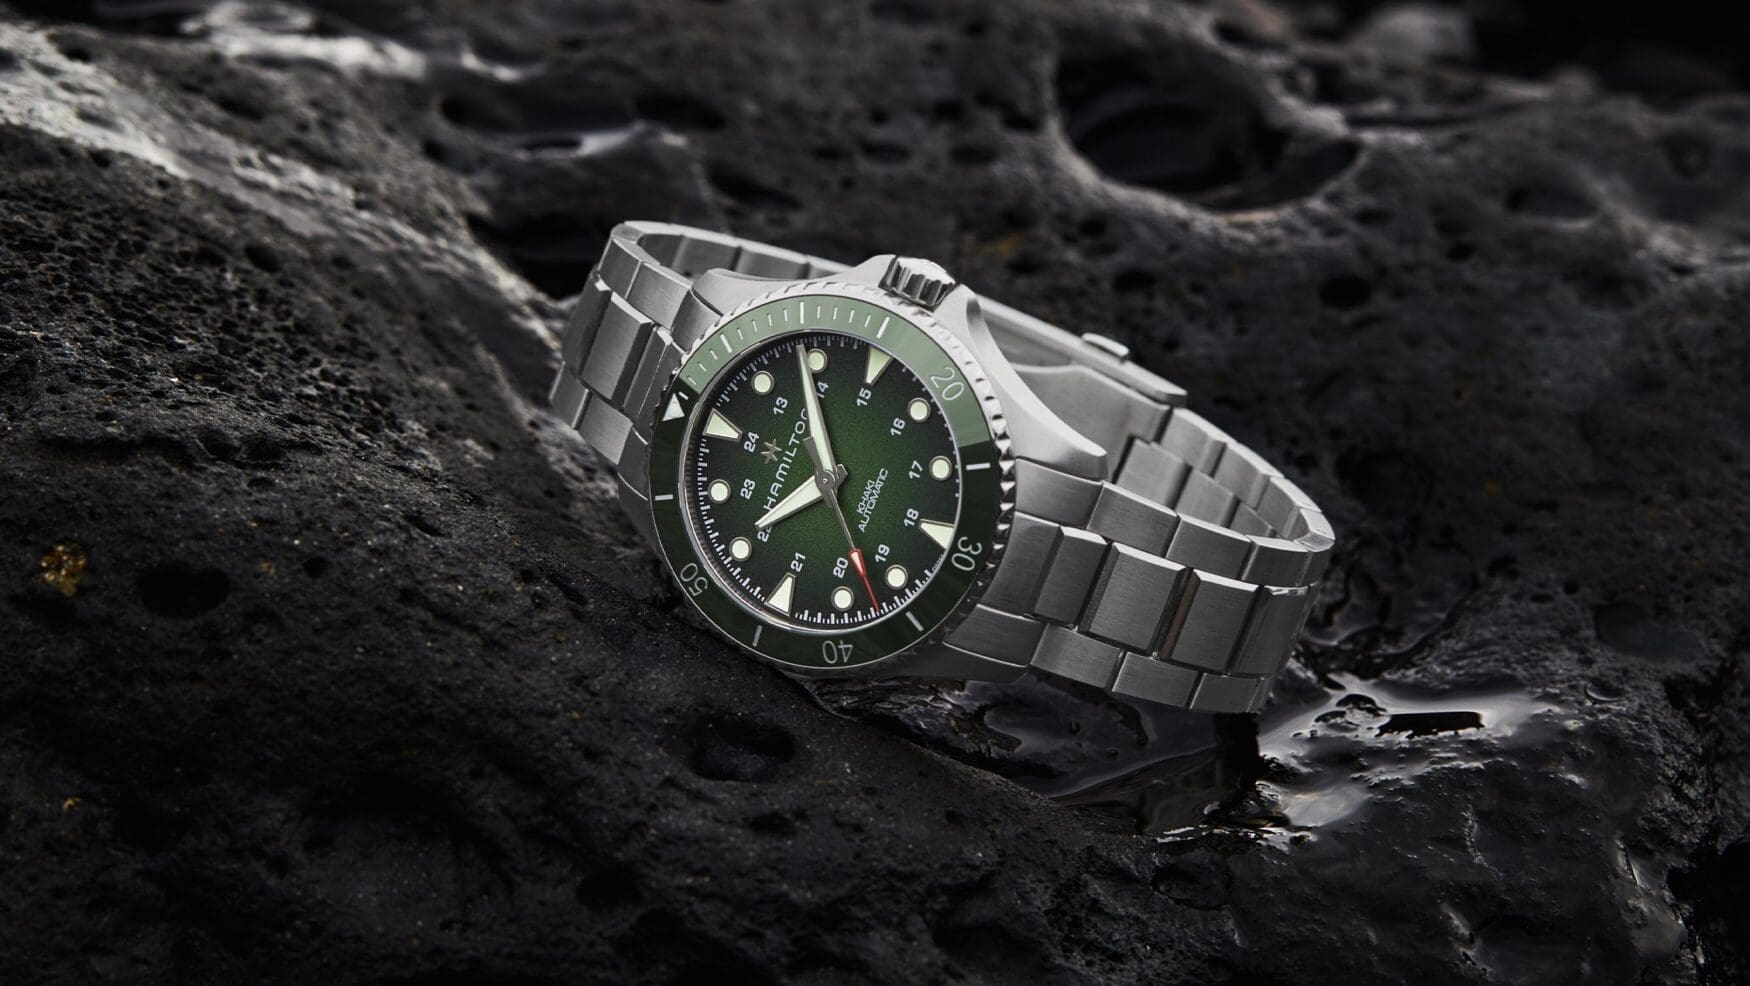 New Hamilton Khaki Navy Scuba watches come in one green colour, but two sizes